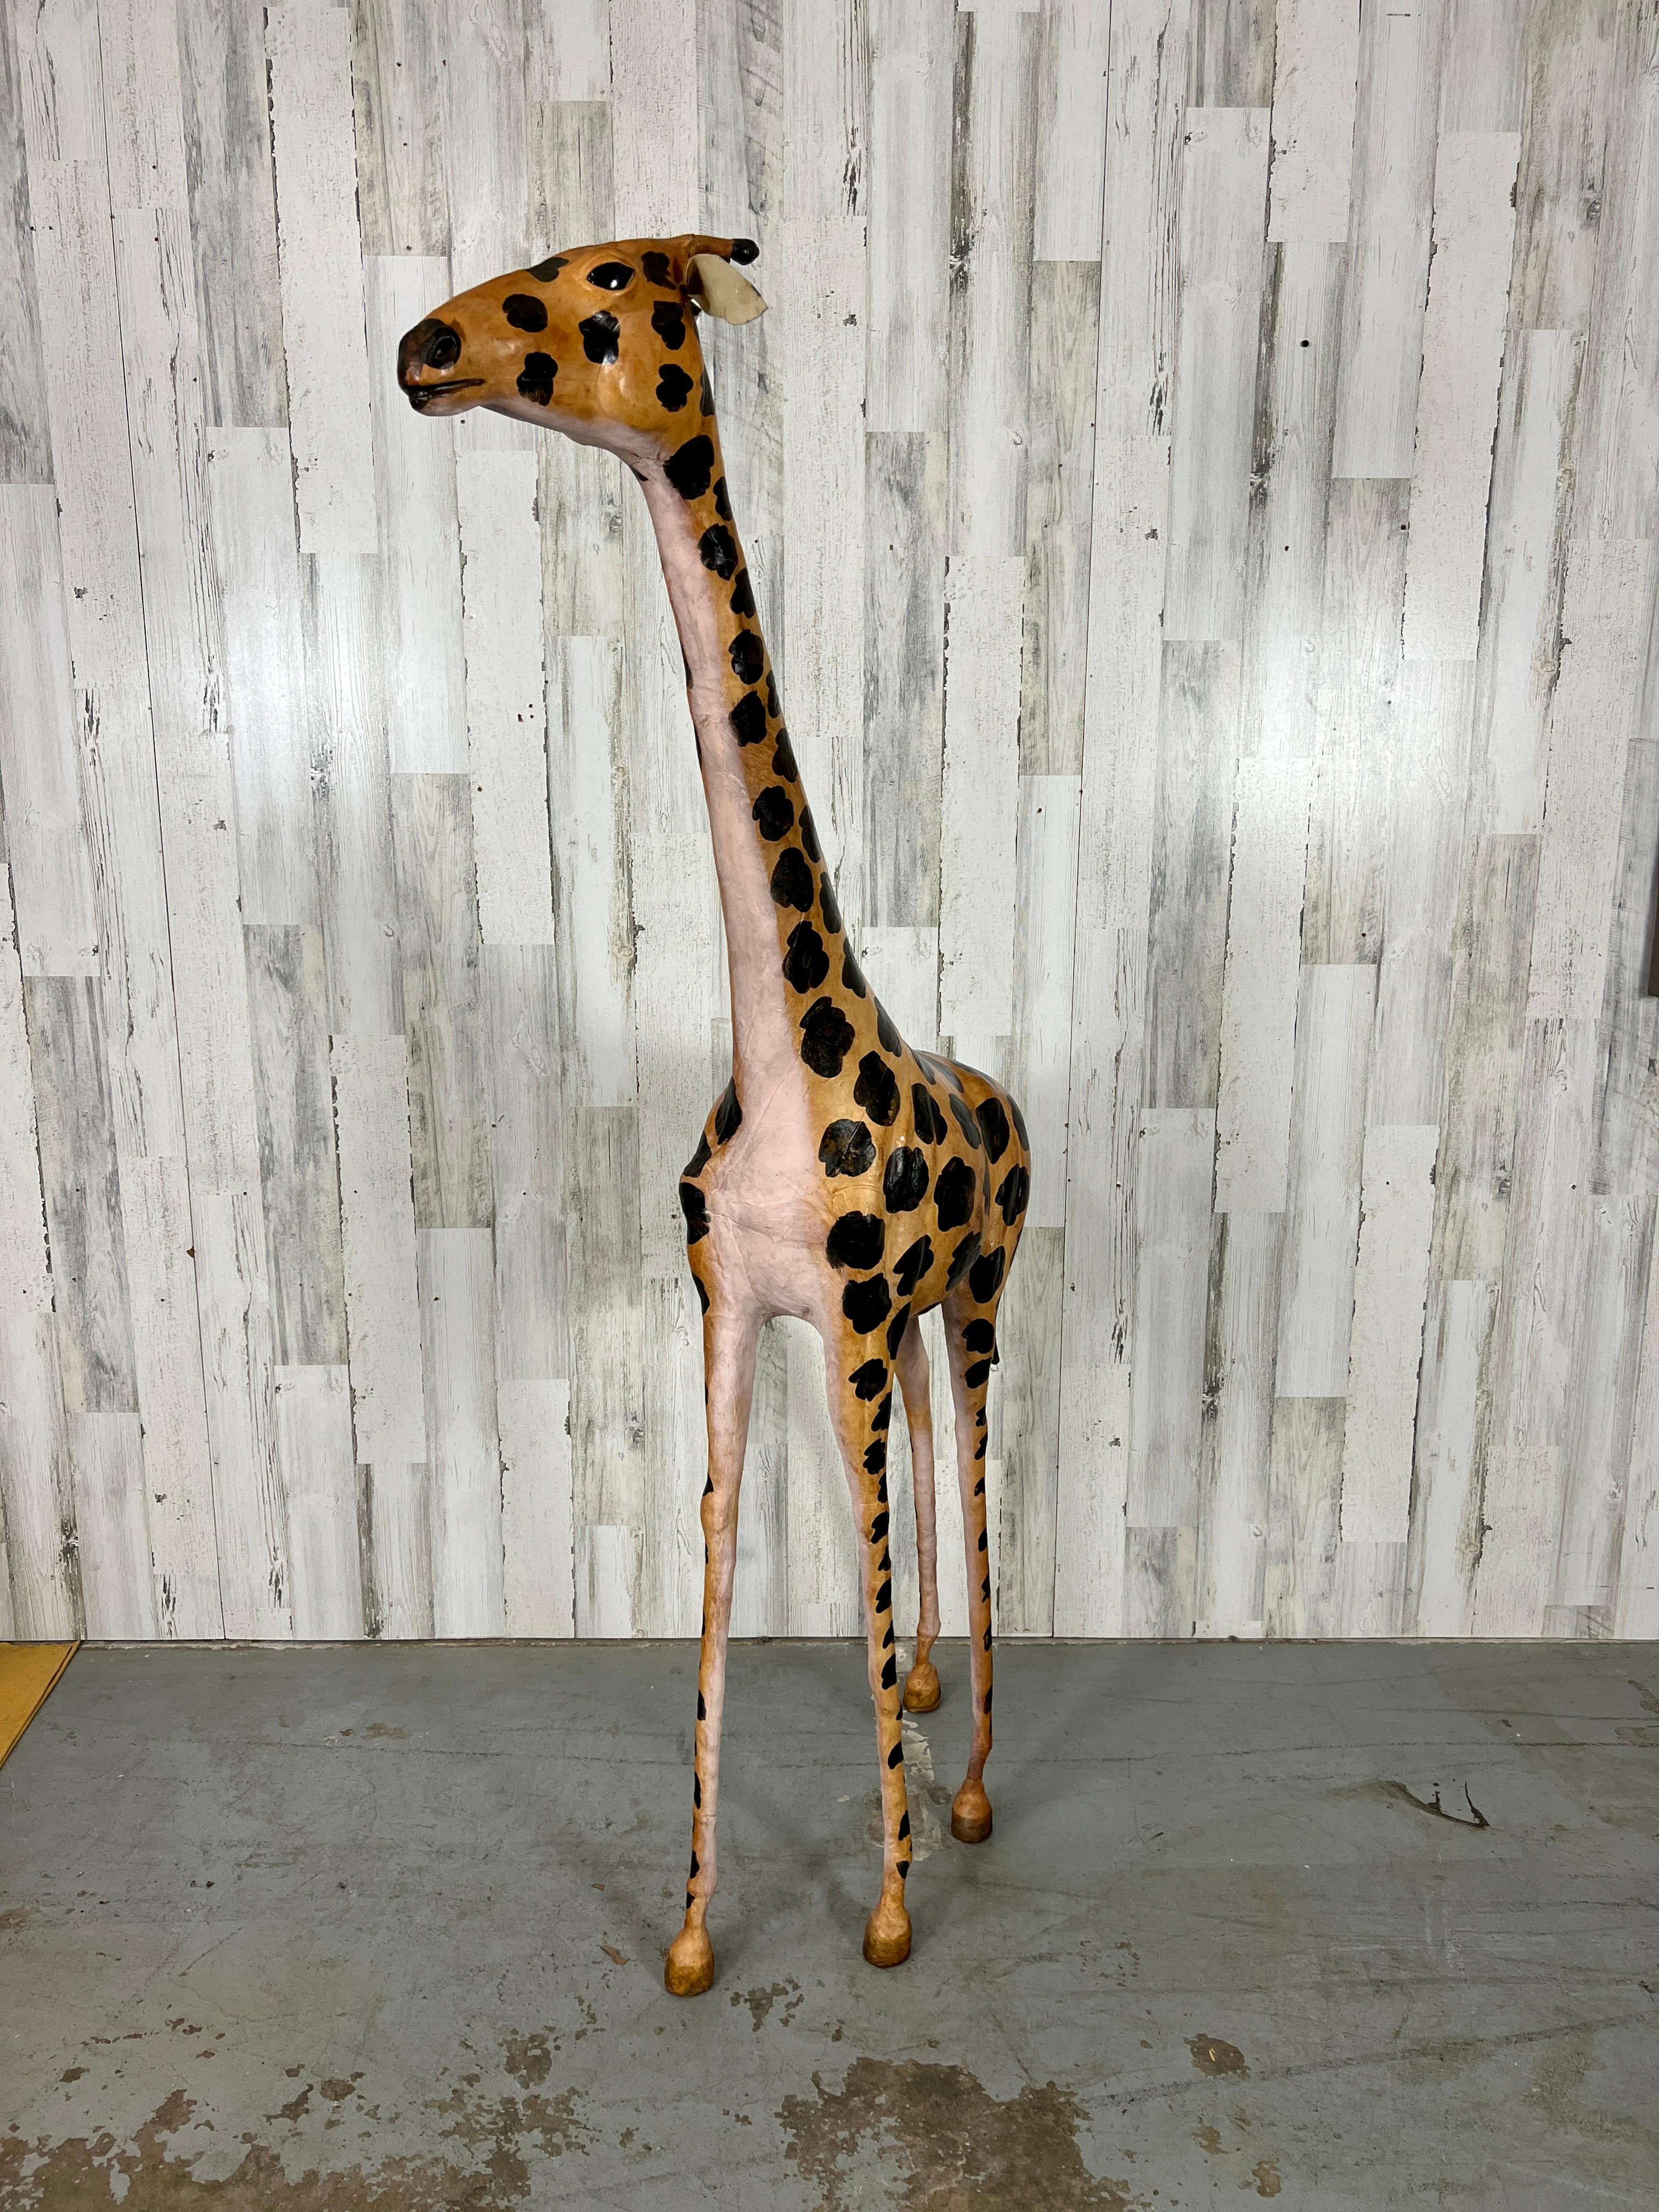 Extra Large hand crafted leather wrapped giraffe sculpture. intricate Hand wrapped leather with hand painted spots & details. Very rare to find one this tall! An extraordinary addition for the animal lovers home.  